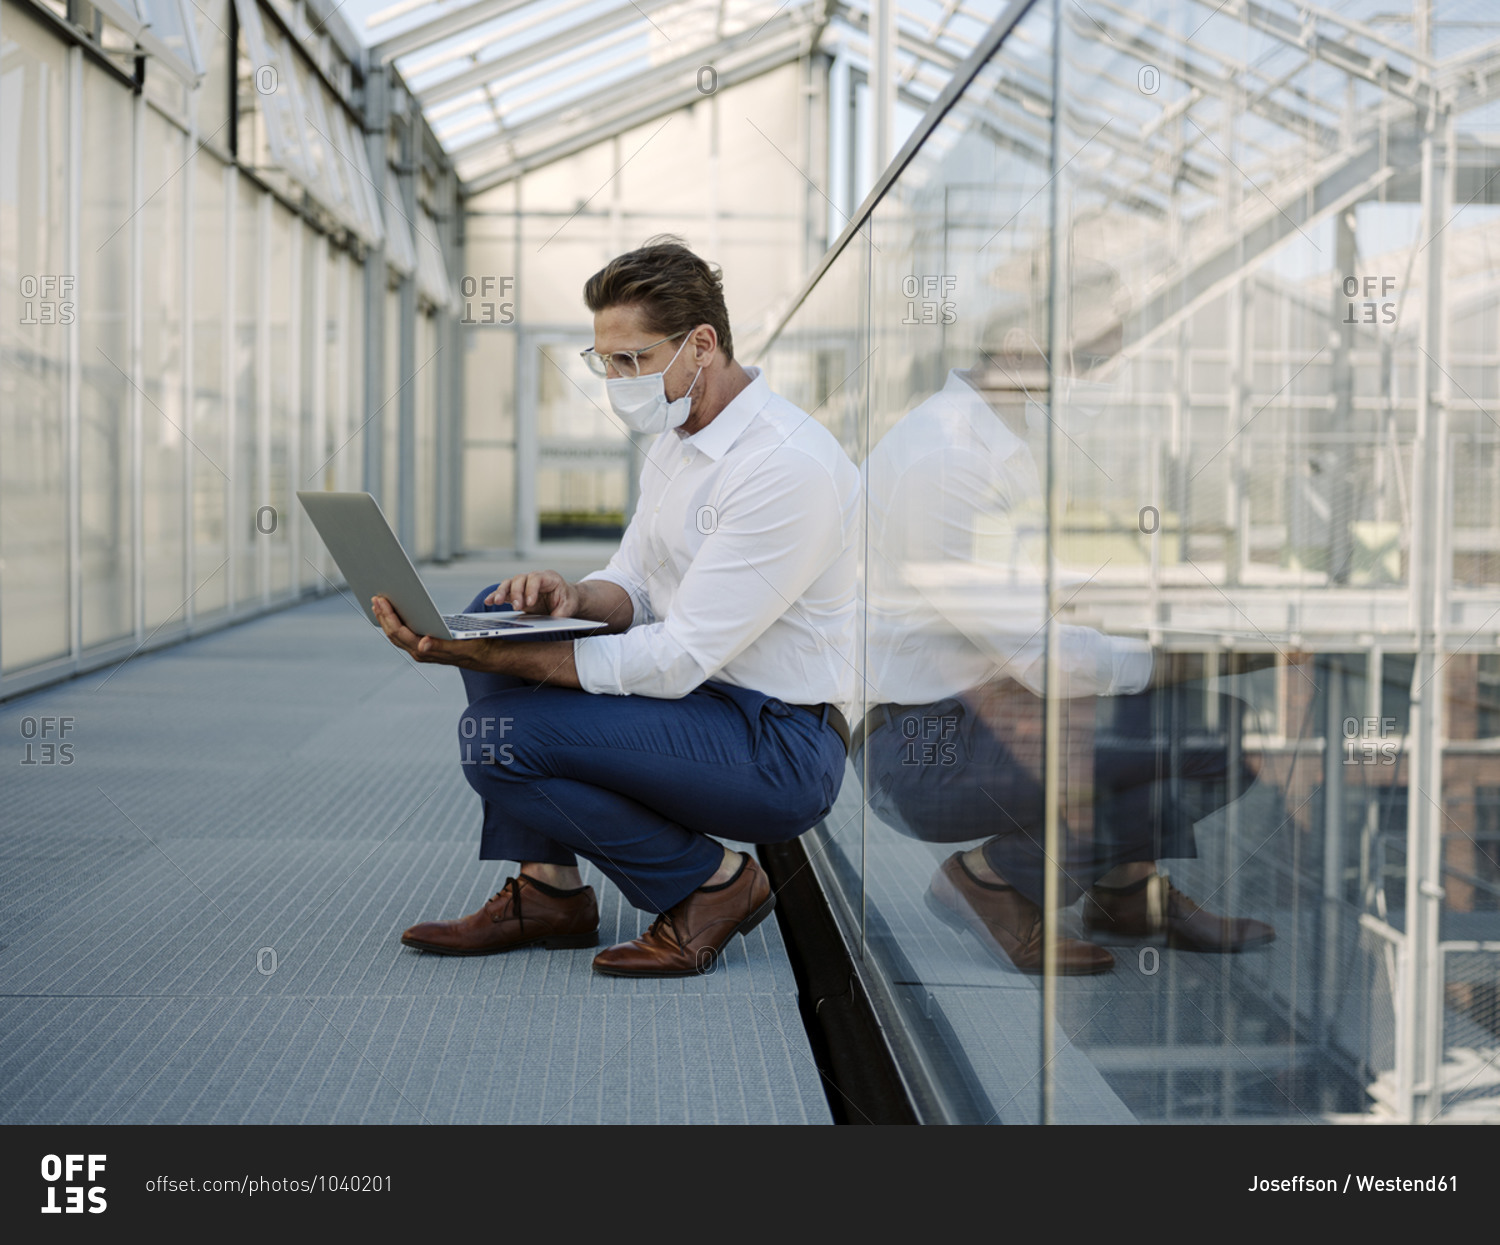 Businessman wearing mask using laptop while crouching on floor in greenhouse